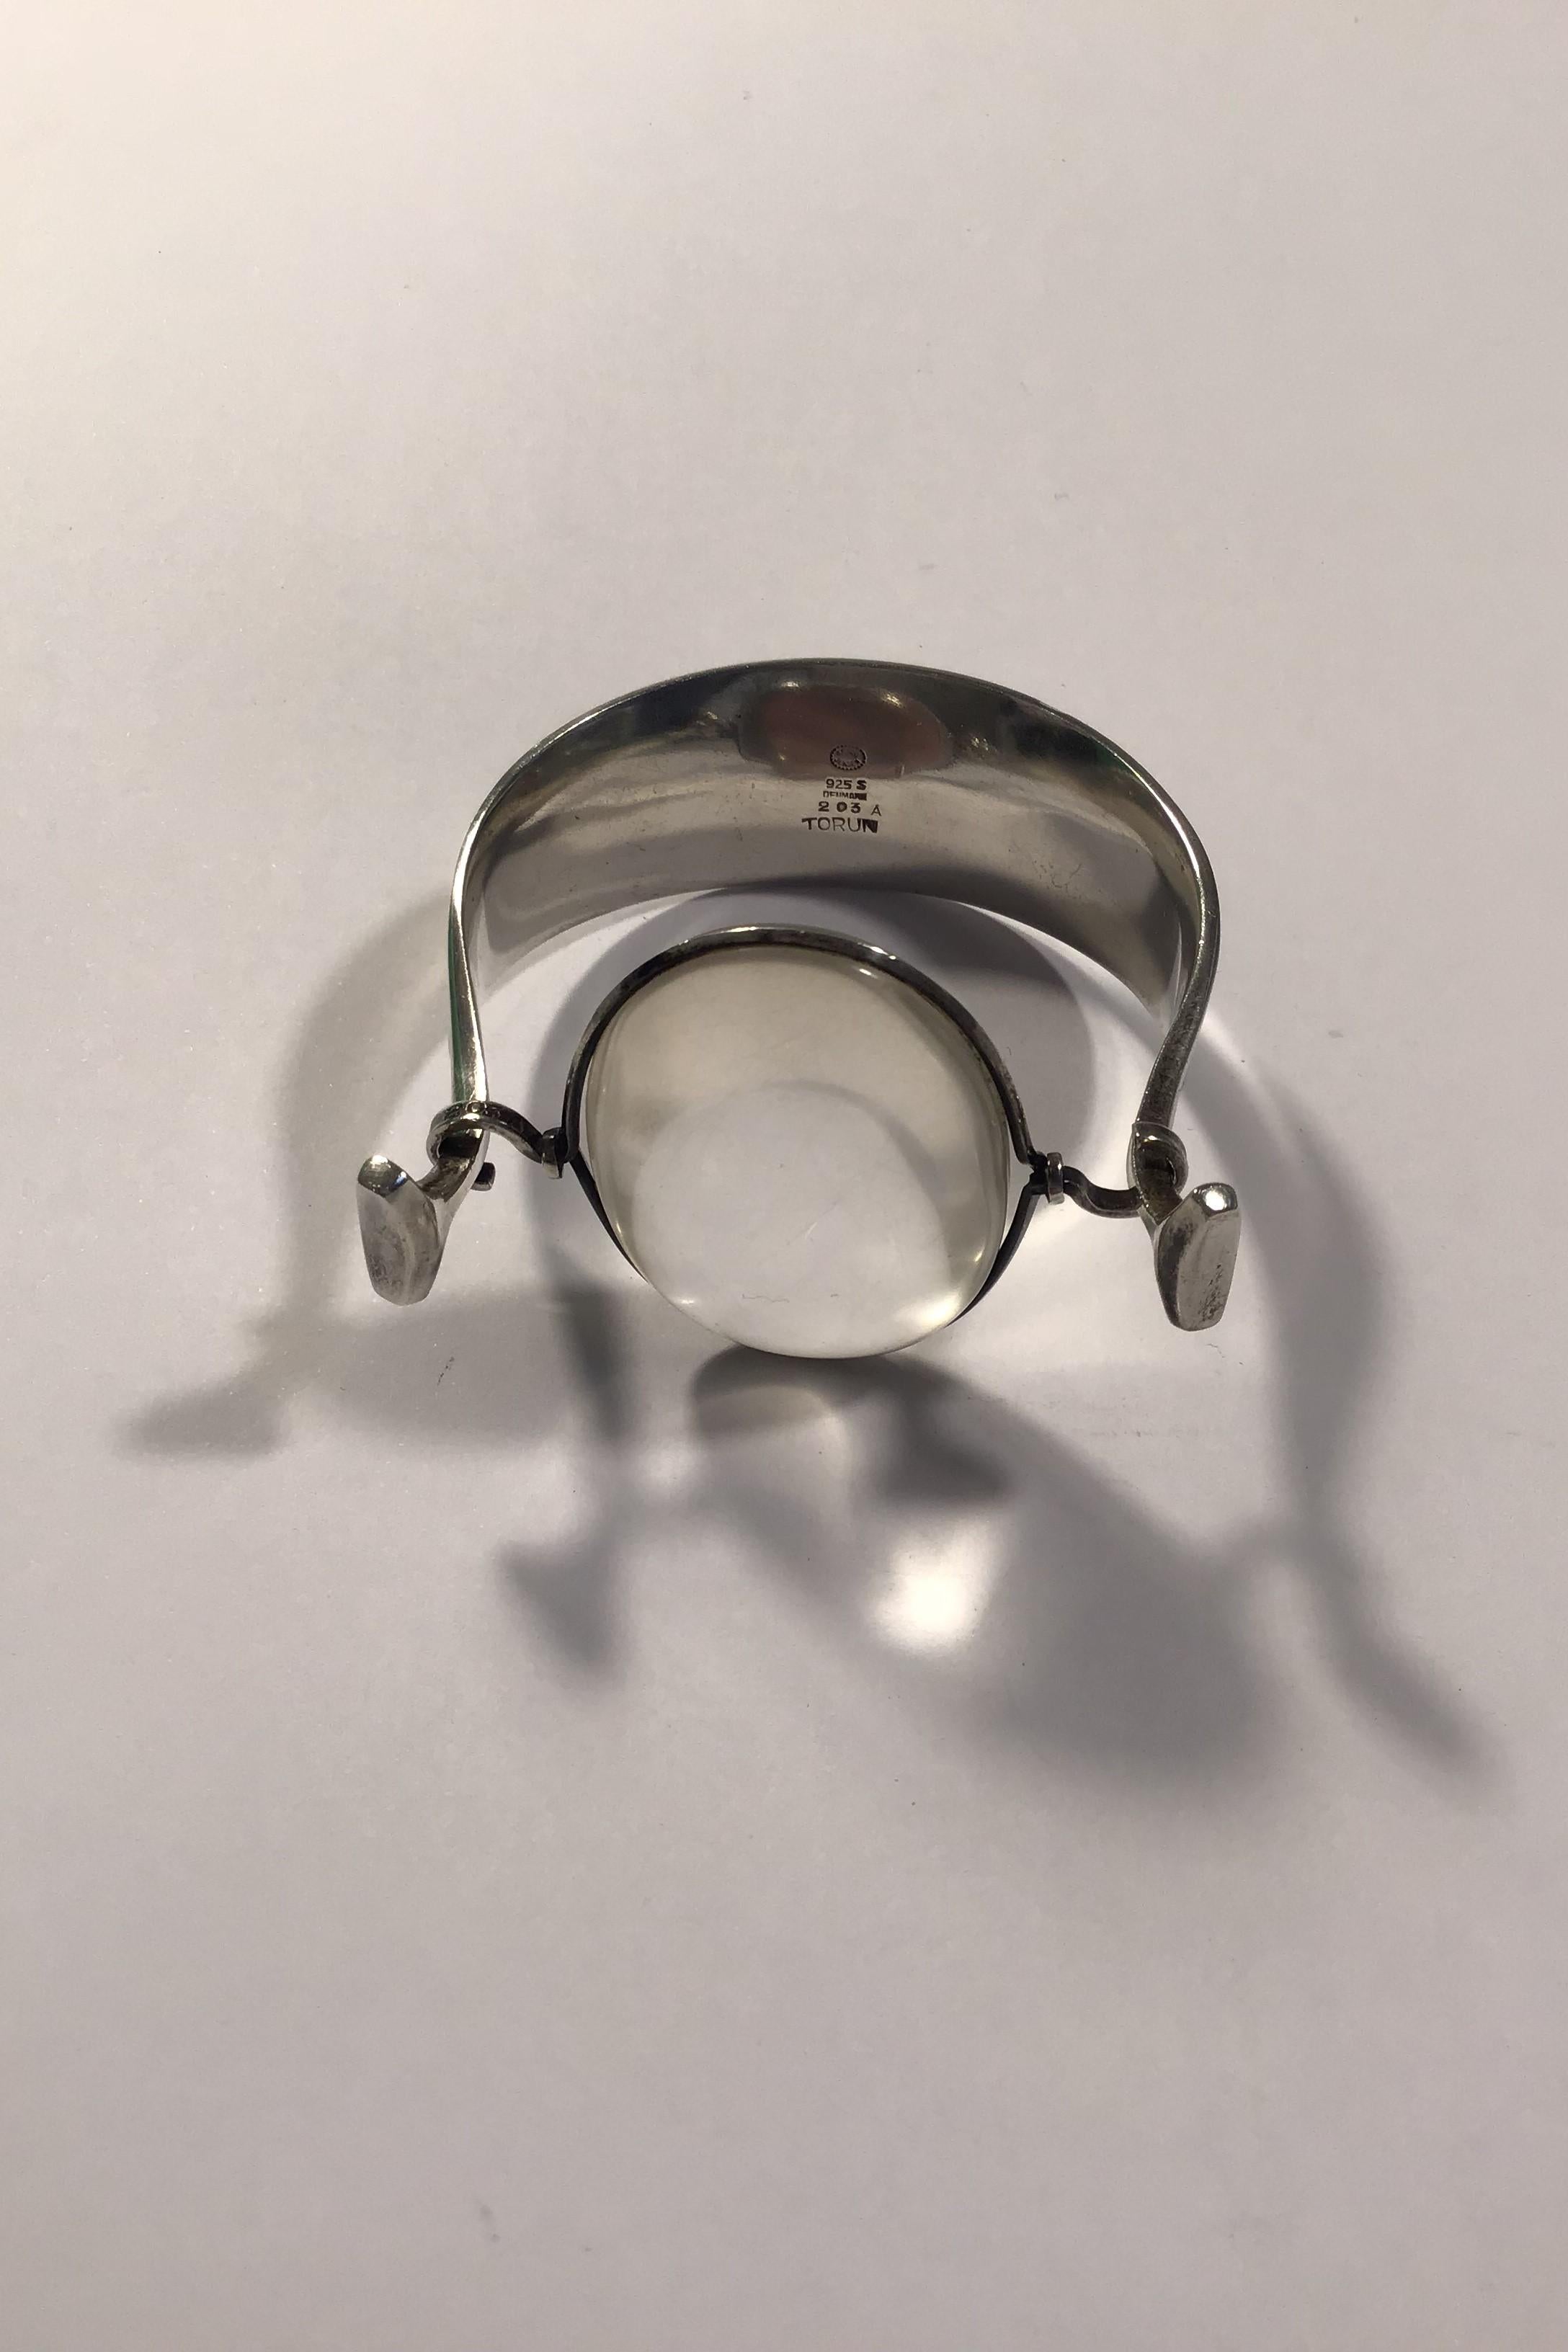 Georg Jensen Sterling Silver Torun Armring with Rutile Quartz No 203. The armring has a diameter of approx. 6 cm / 2 23/64 in. Weighs 55 g / 1.95 oz.